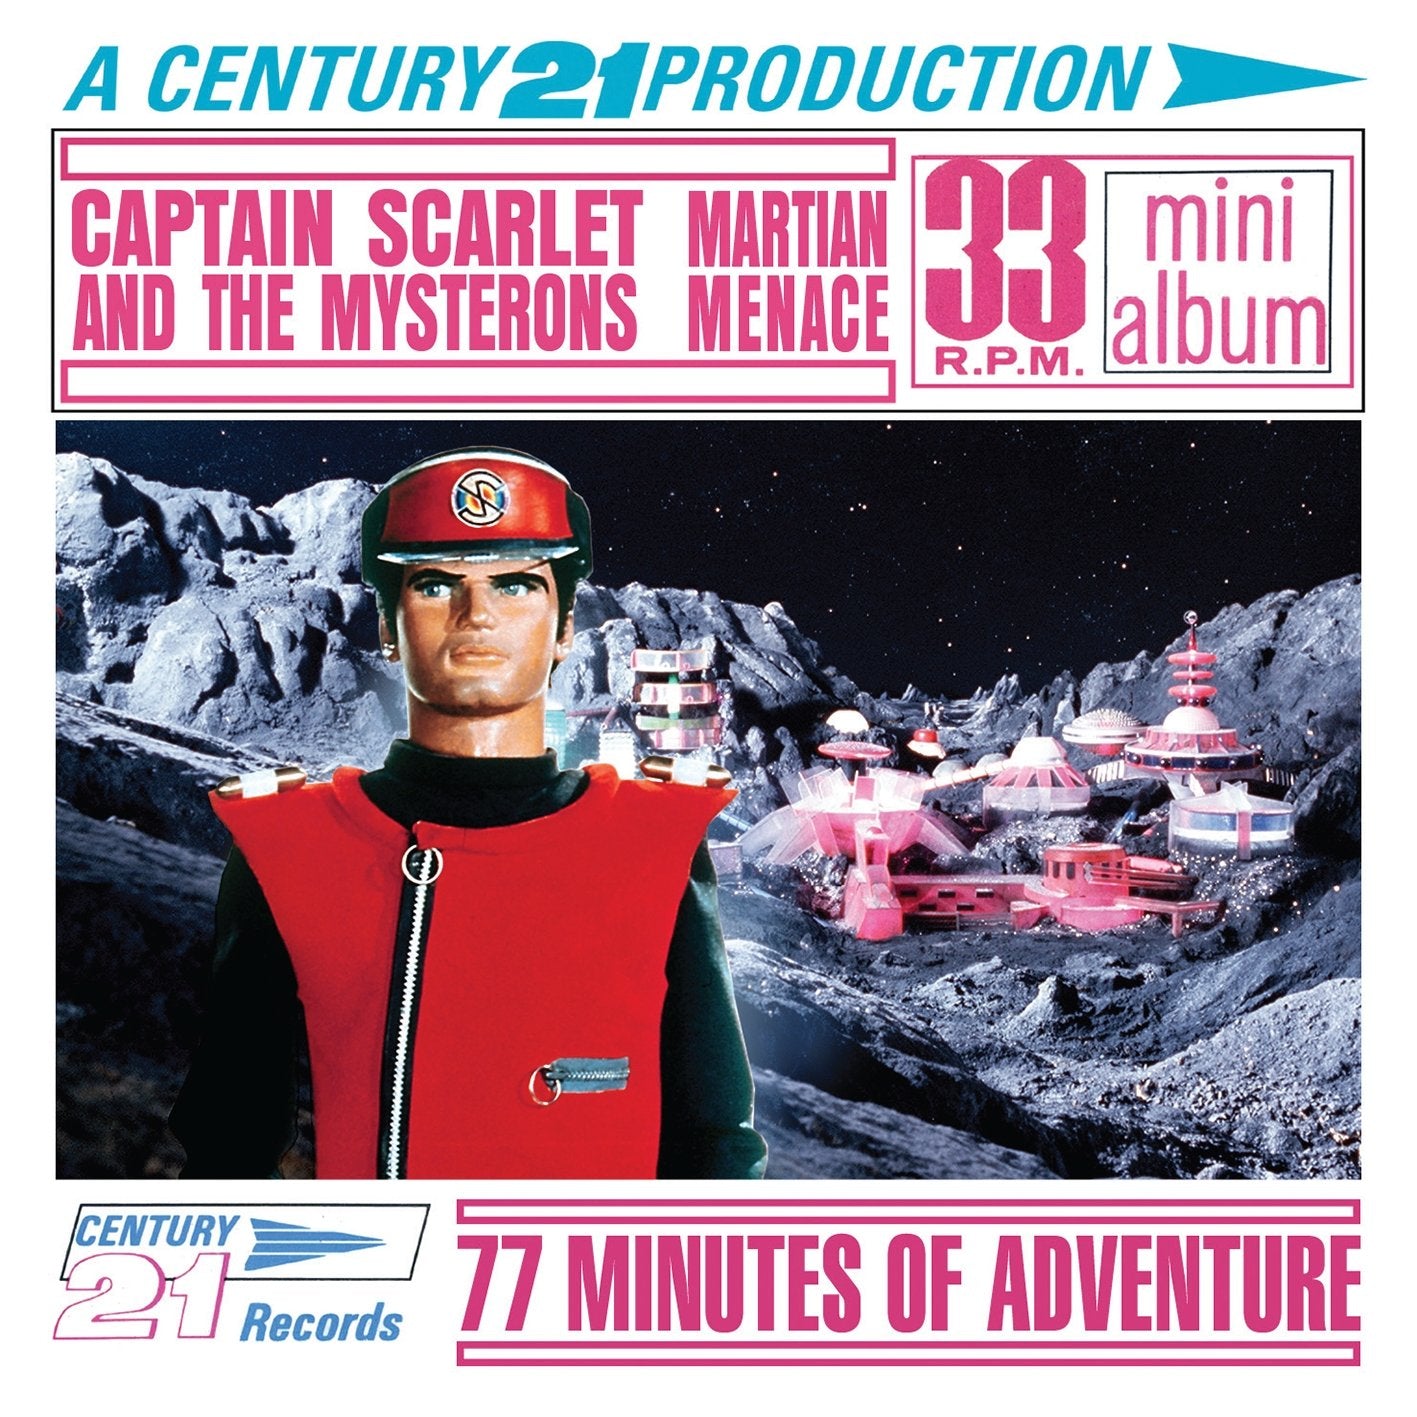 Captain Scarlet and the Mysterons: Martian Menace: Limited Edition (CD)